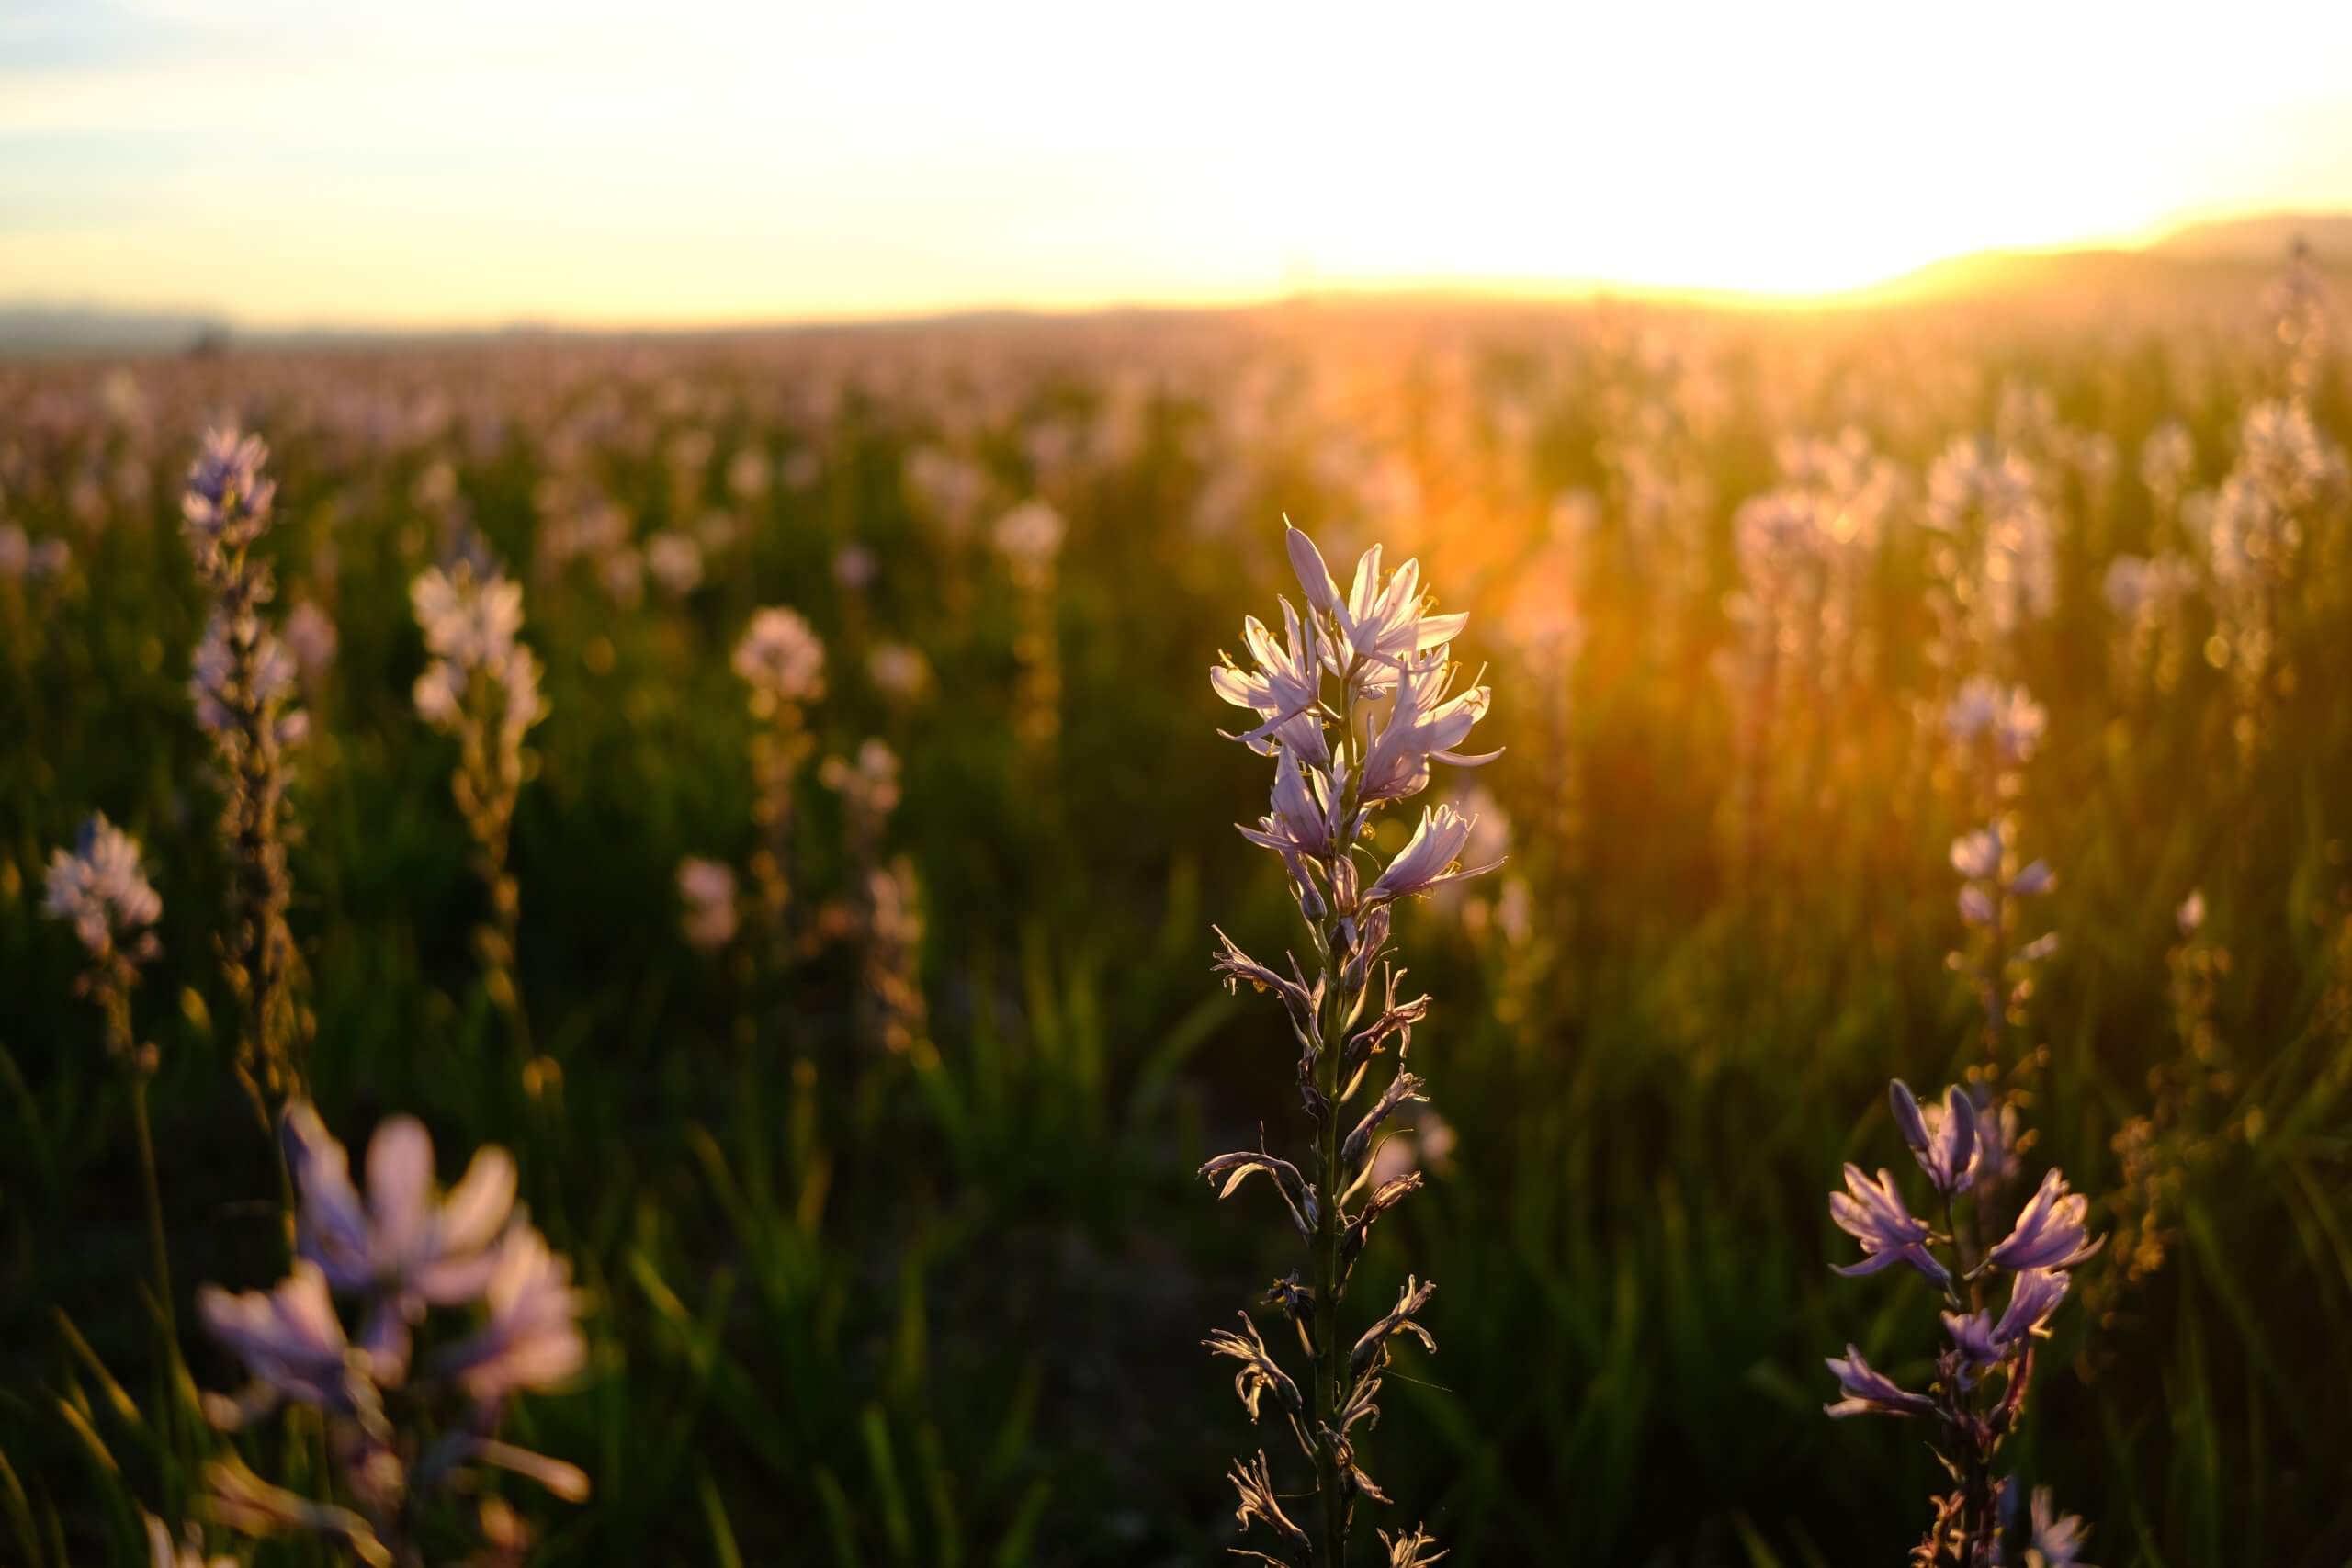 An upclose view of camas blooms in the Camas Prairie at the Centennial Marsh Wildlife Management Area.